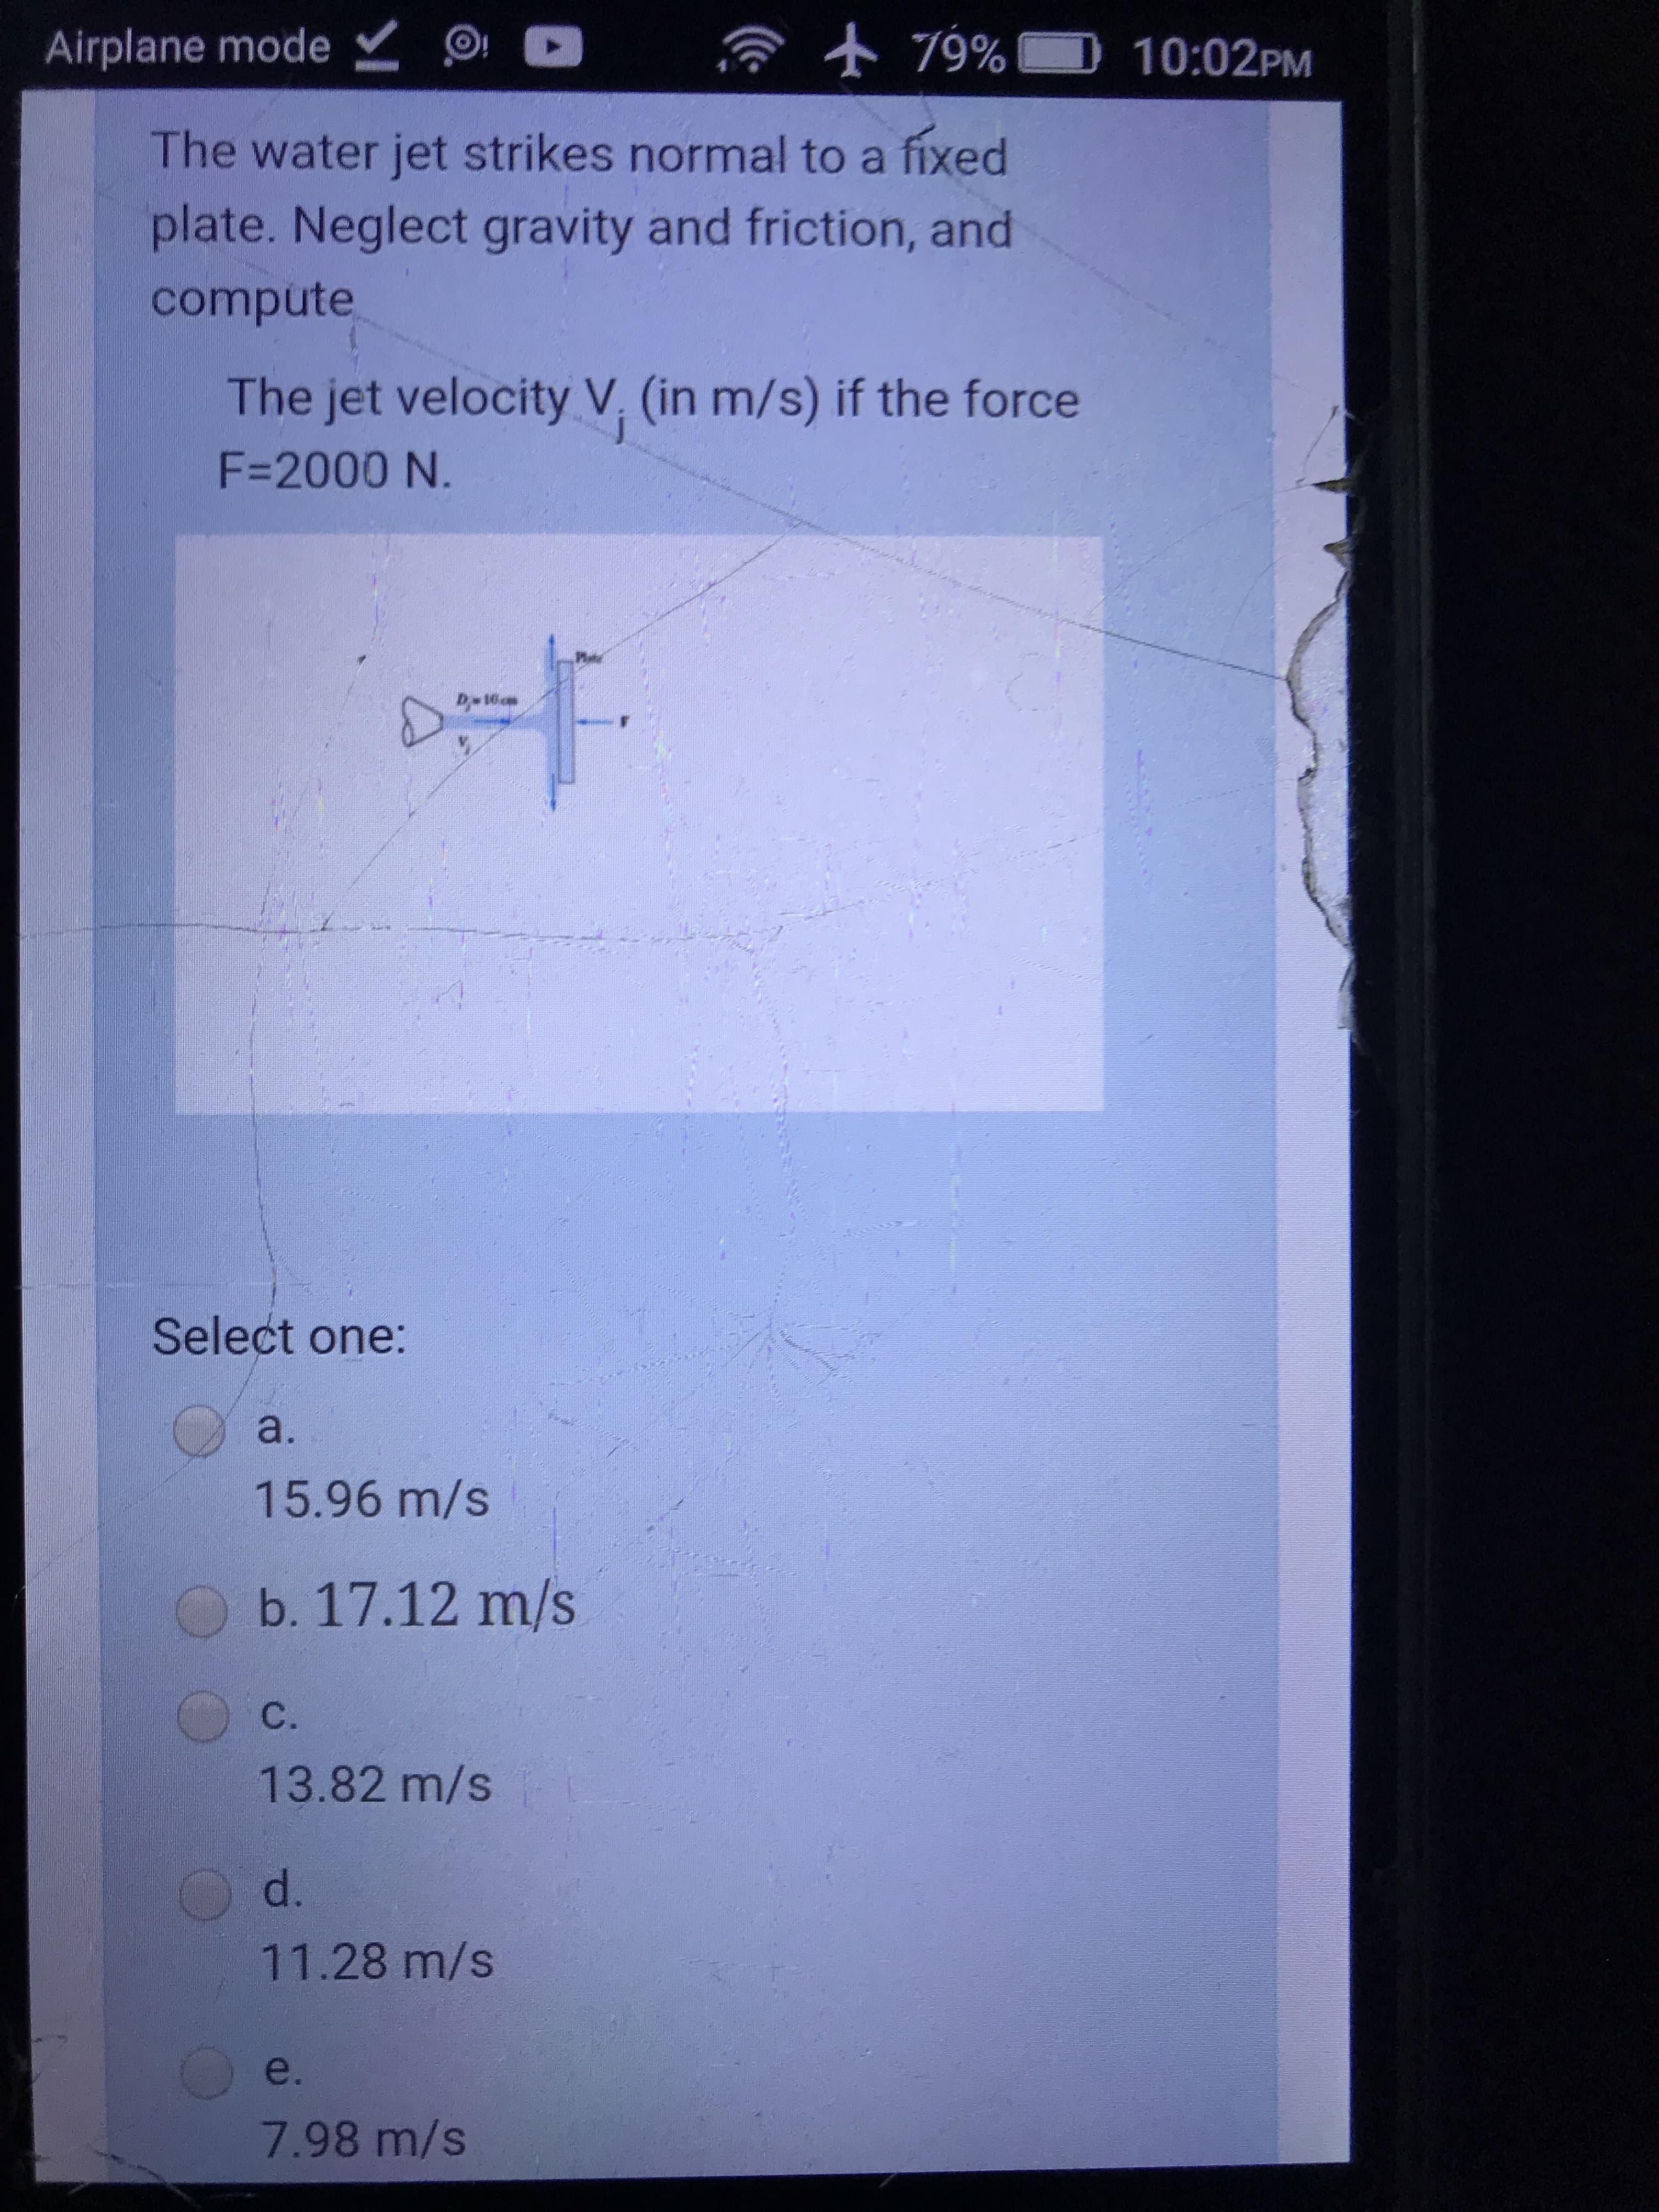 Airplane mode v
+ 79%O 10:02PM
The water jet strikes normal to a fixed
plate. Neglect gravity and friction, and
compute
The jet velocity V, (in m/s) if the force
F=2000 N.
Select one:
O a.
15.96 m/s
b. 17.12 m/s
C.
13.82 m/s
d.
11.28 m/s
O e.
7.98 m/s
